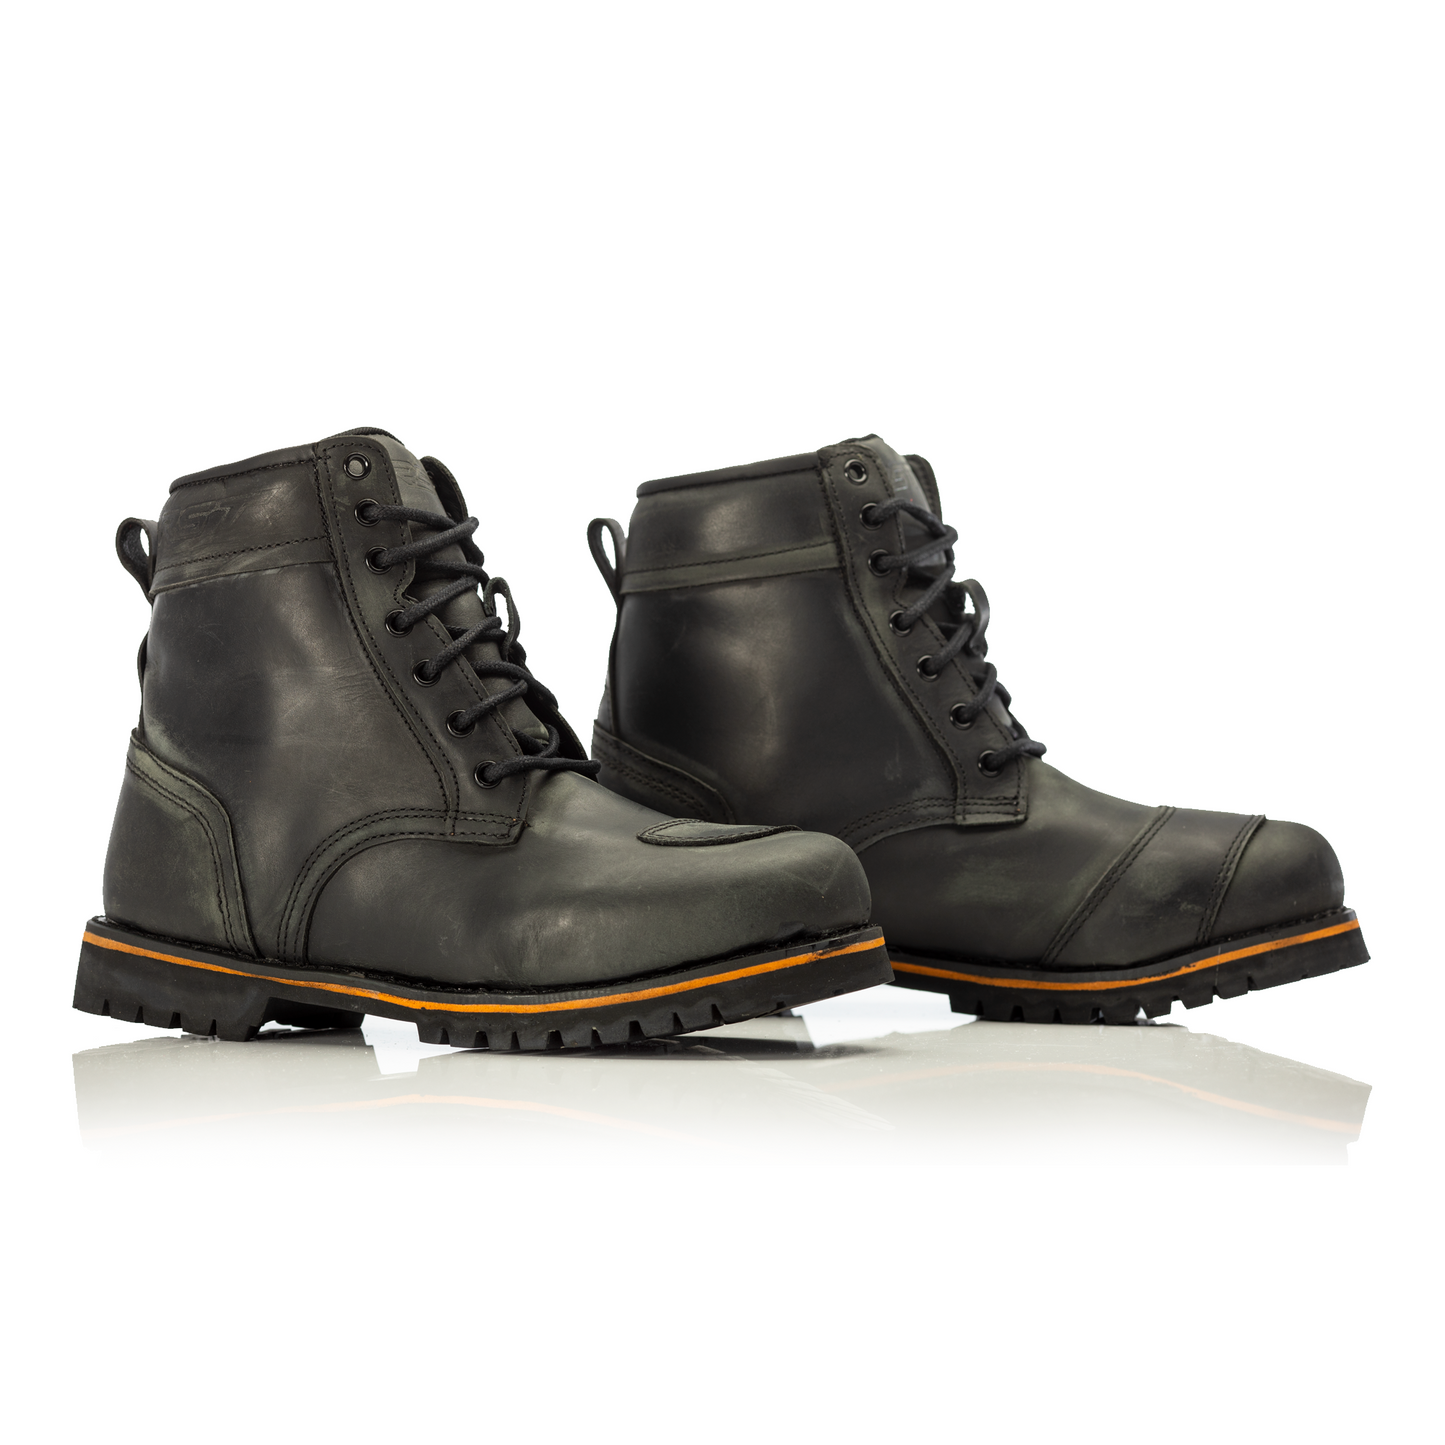 RST Roadster II 2 Waterproof Leather Boots - CE APPROVED - Oily Black